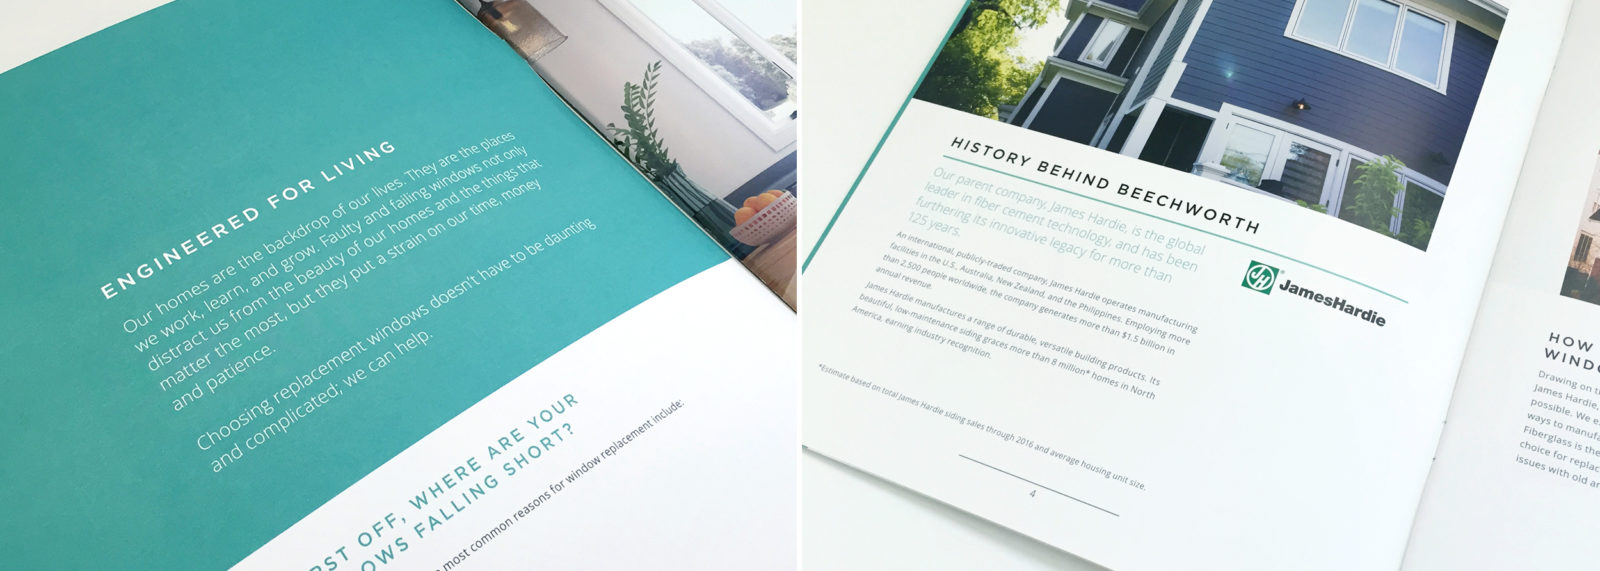 Snapshots of white space in the Beechworth Windows Brochure